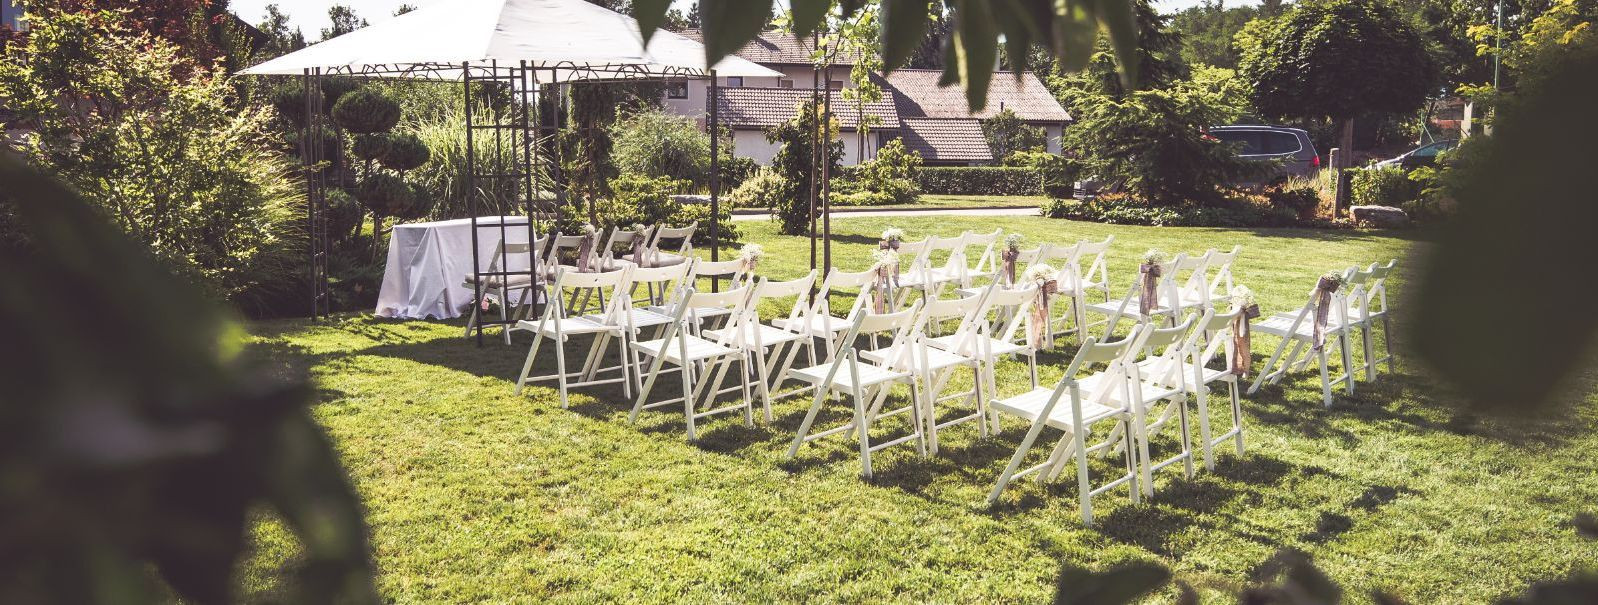 Outdoor weddings offer a backdrop of natural beauty and an open-air ambiance that is hard to replicate indoors. They provide a canvas for creativity and the opp